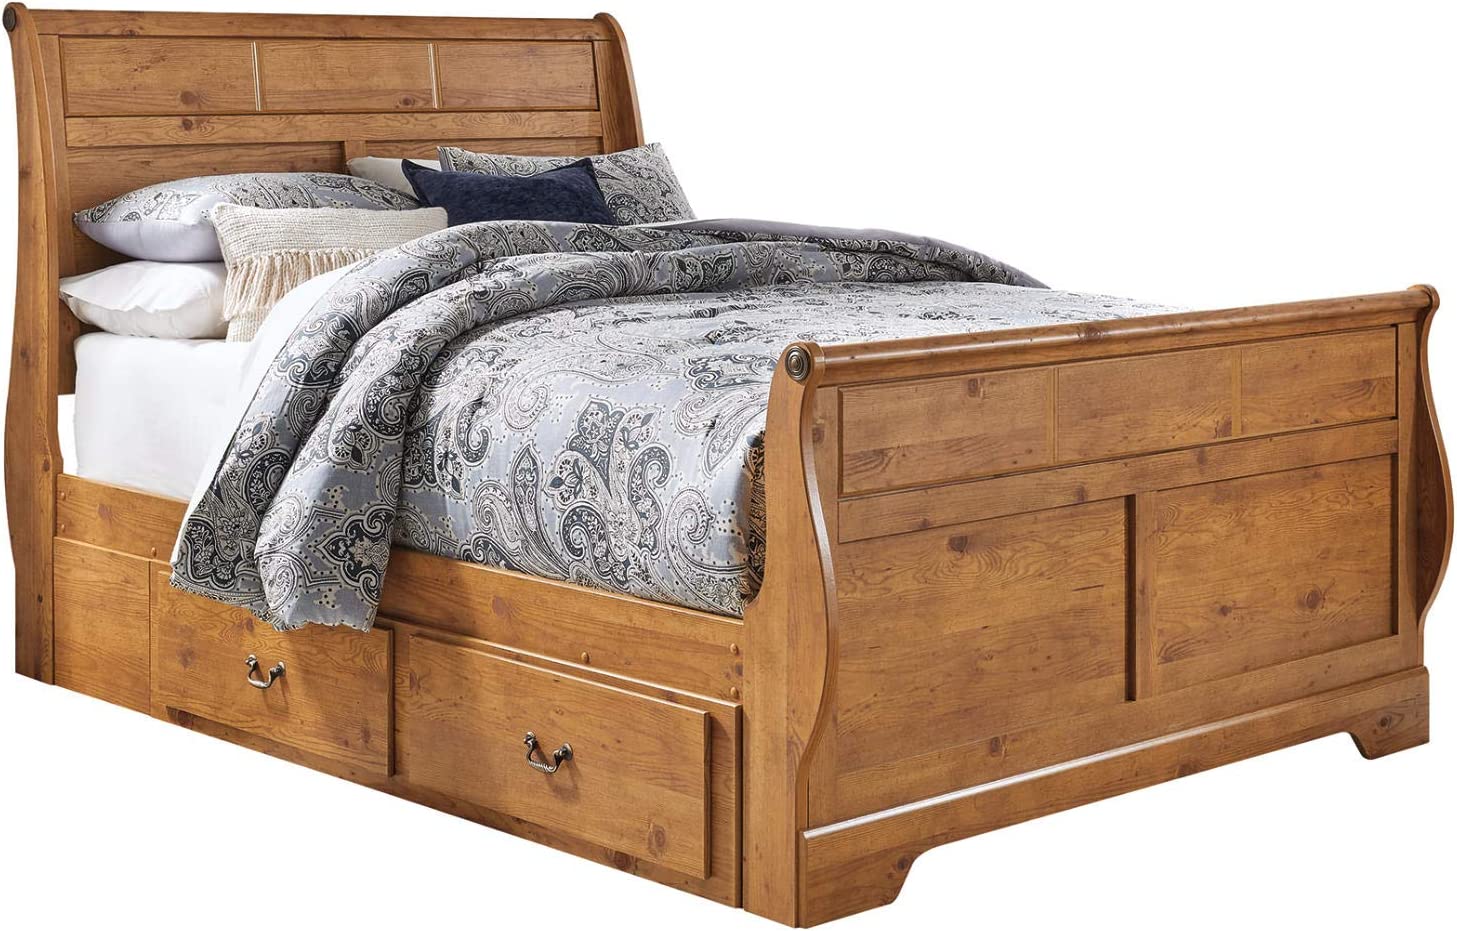 Signature Design by Ashley Bittersweet Light Brown Pine Grain Finish Queen Sleigh Headboard - image 2 of 5